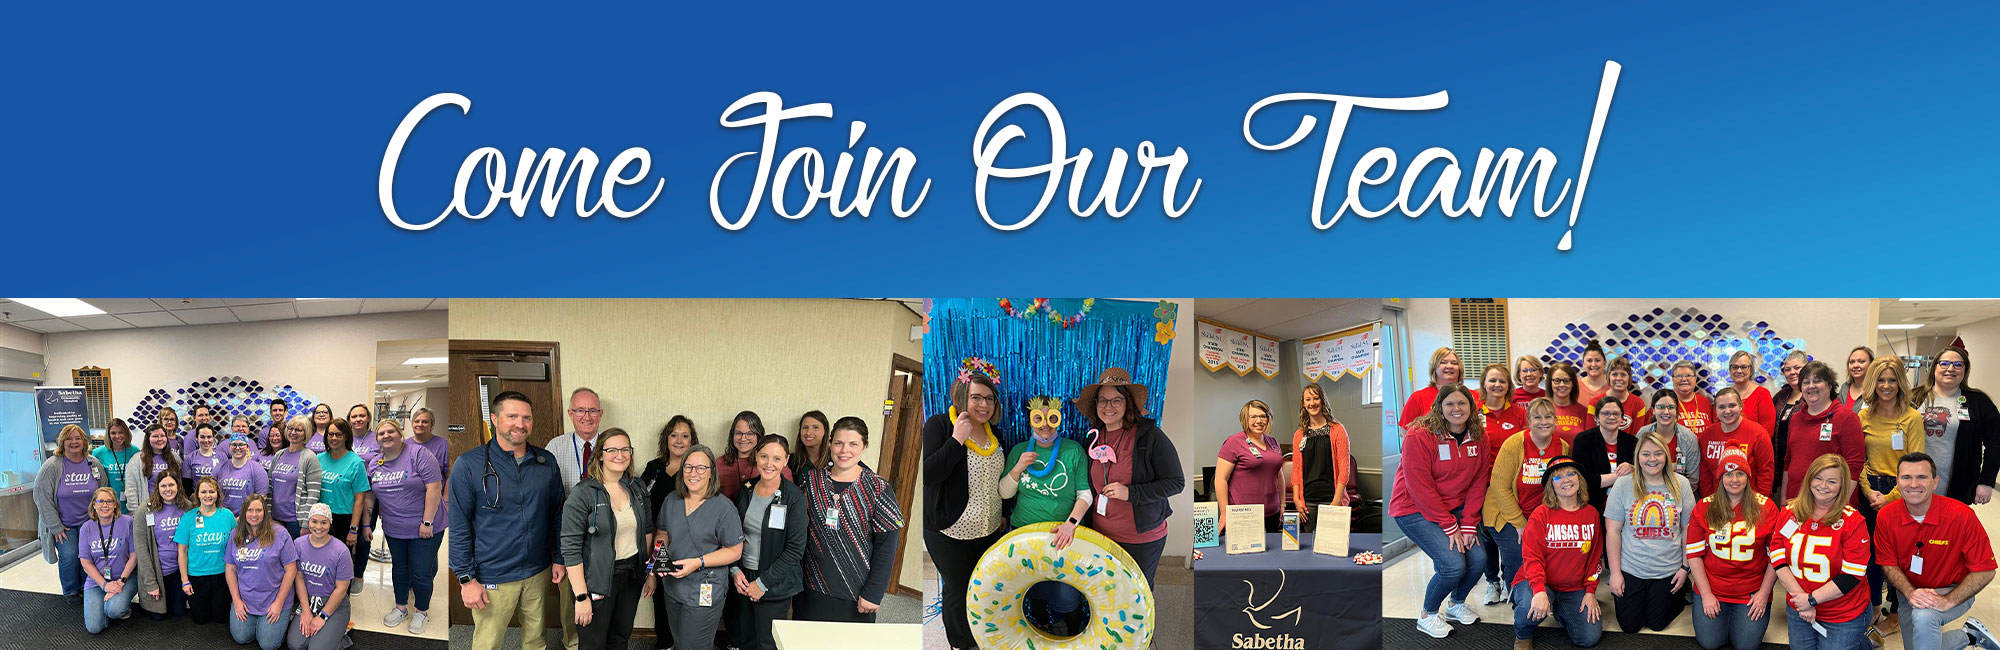 Pictured are multiple photos of our staff with the statement Come Join Our Team!